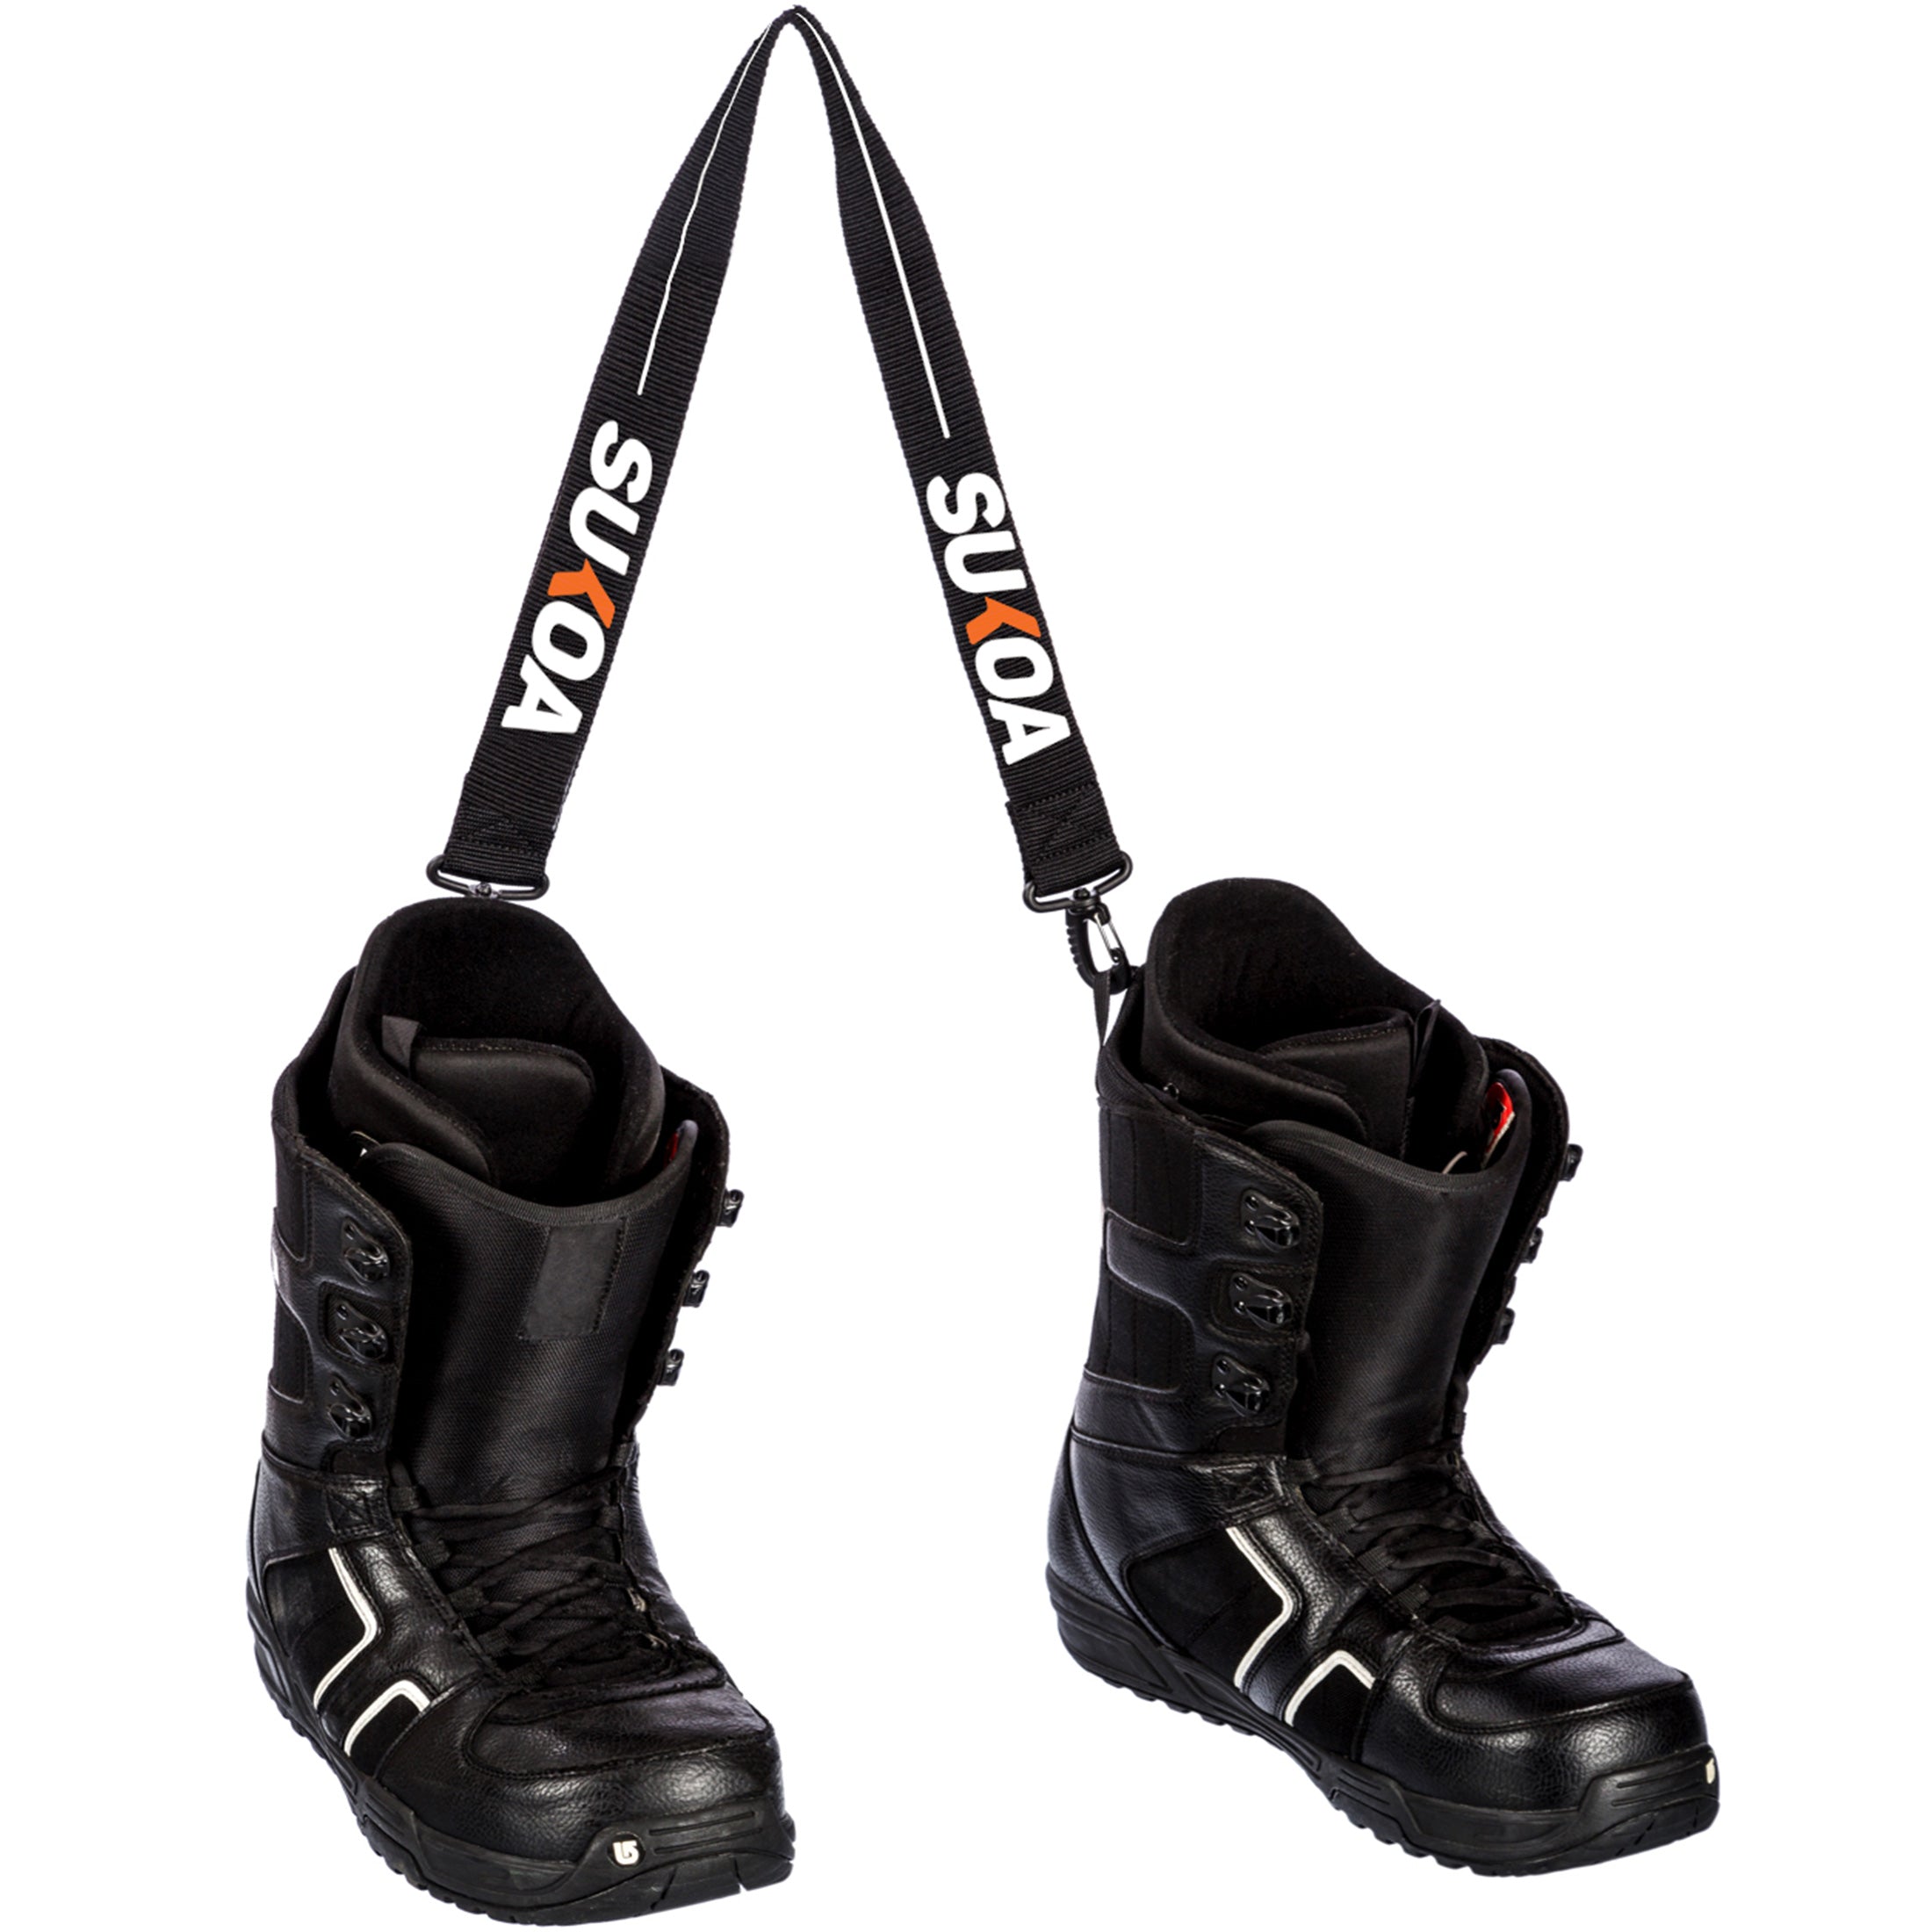 BootYo! by Mt Sun Gear Ski Boot and Snowboard Boot Carrier Straps Great for